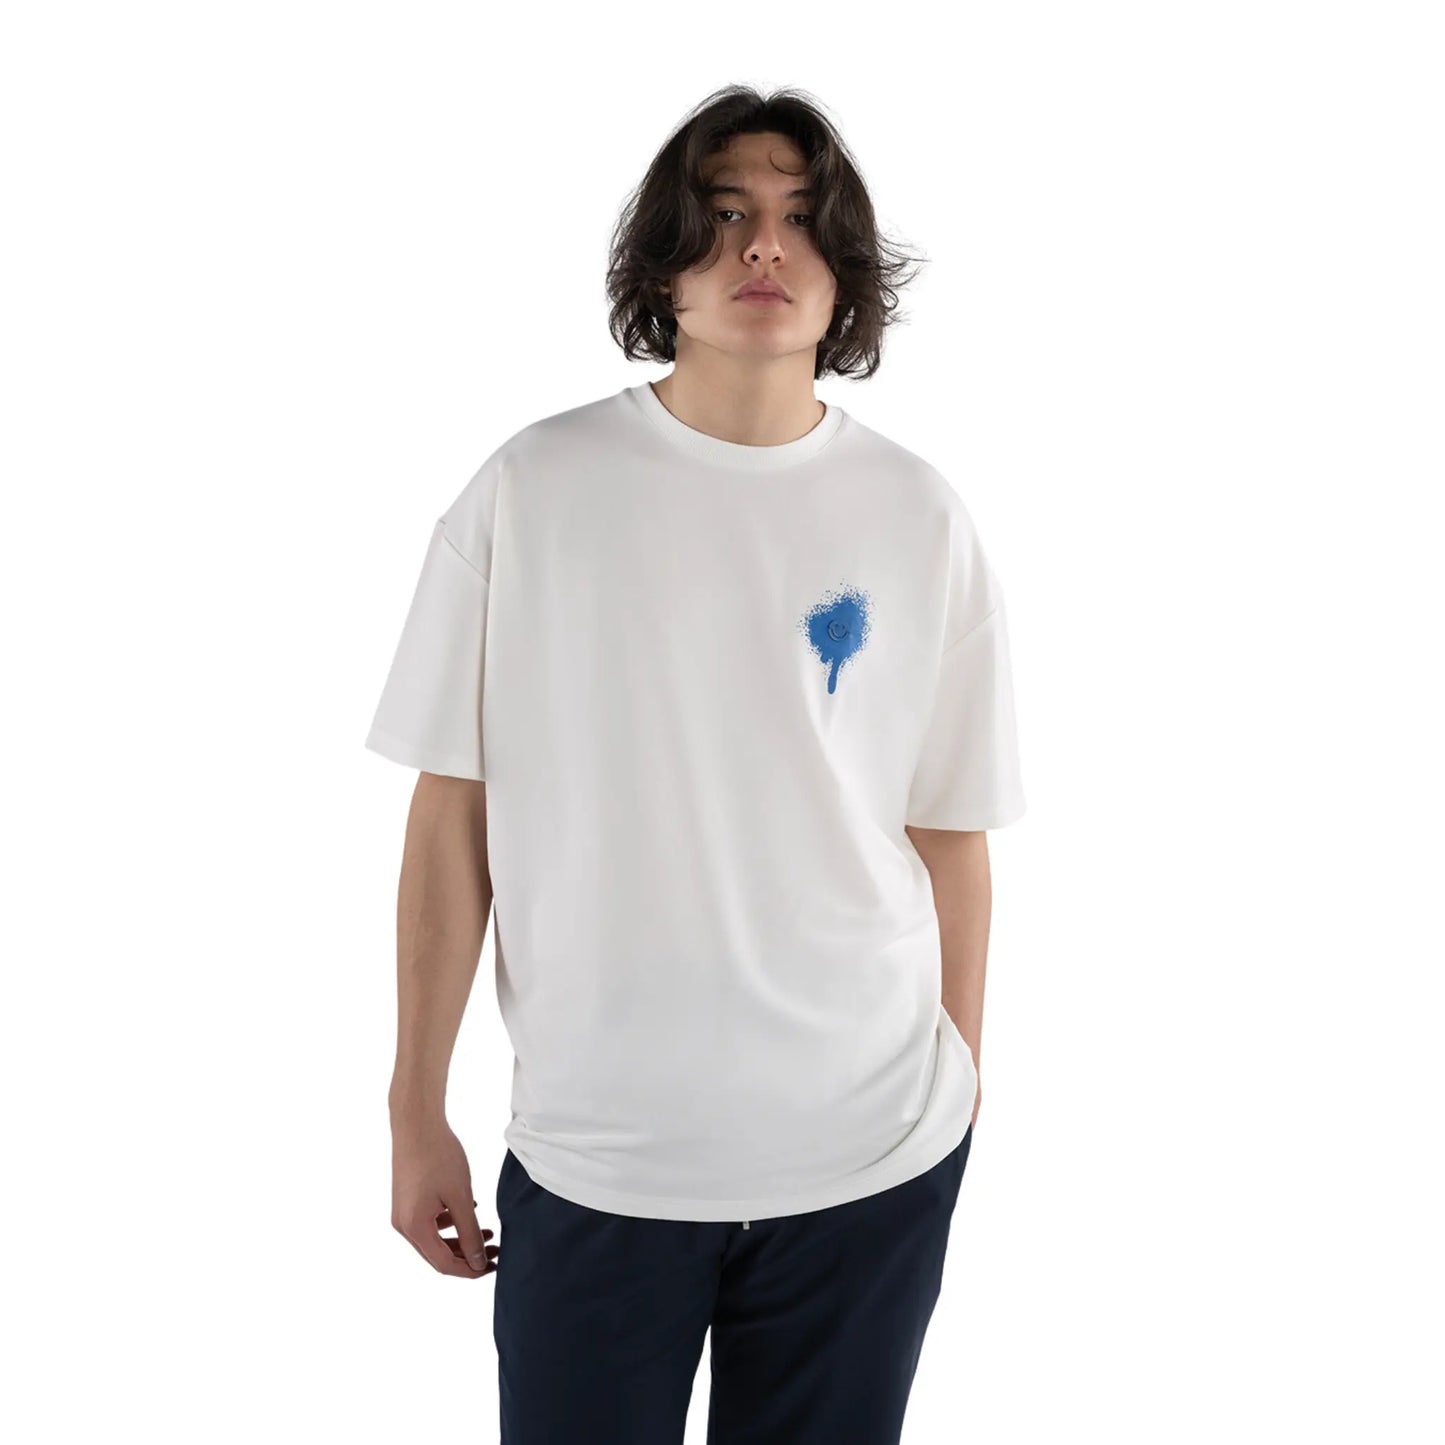 Oversized T-Shirt White with Blue Painted Smiley and Graffiti worn by man front close up view